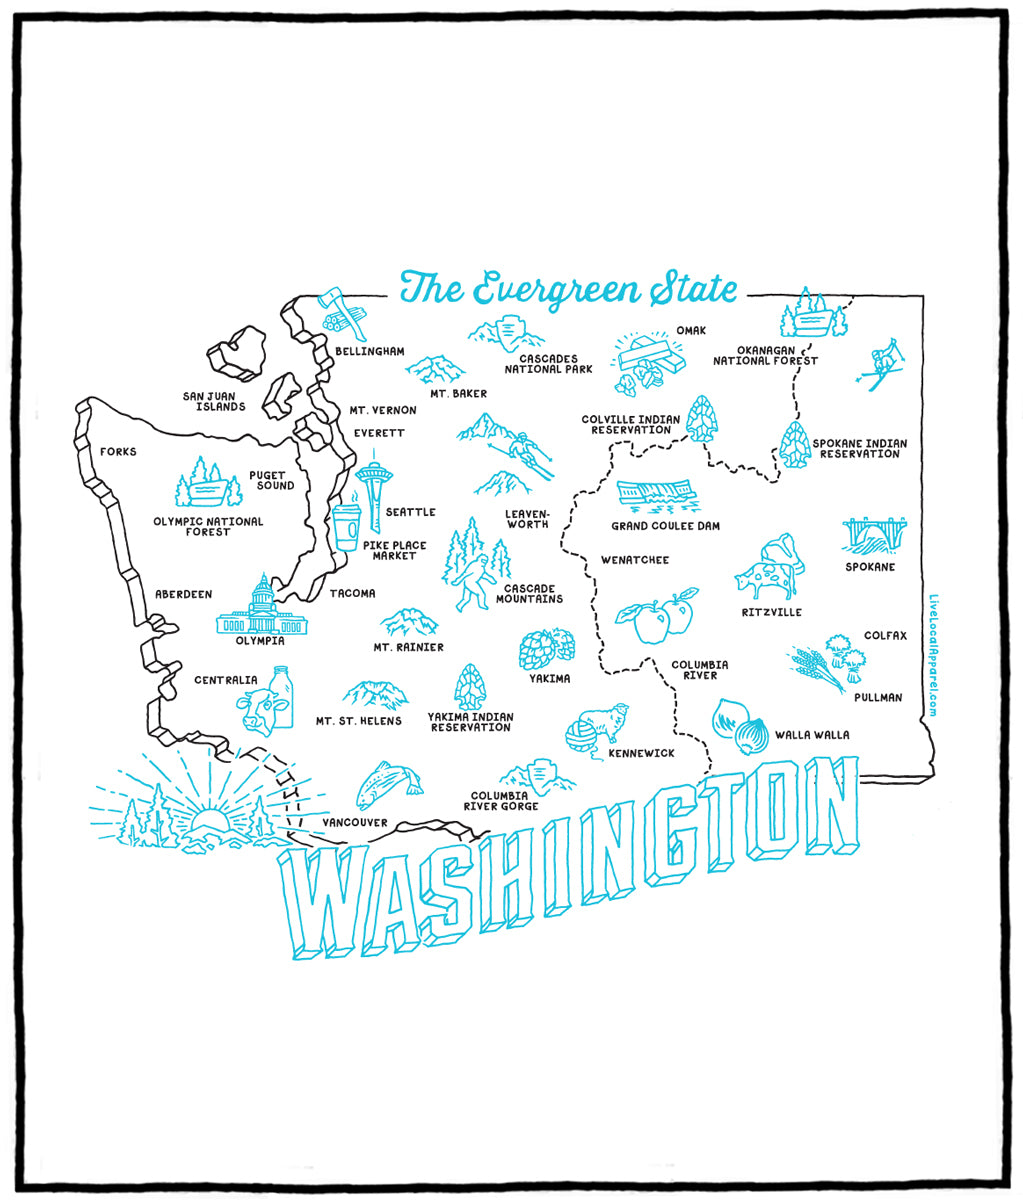 Washington State - Check out the Evergreen State!